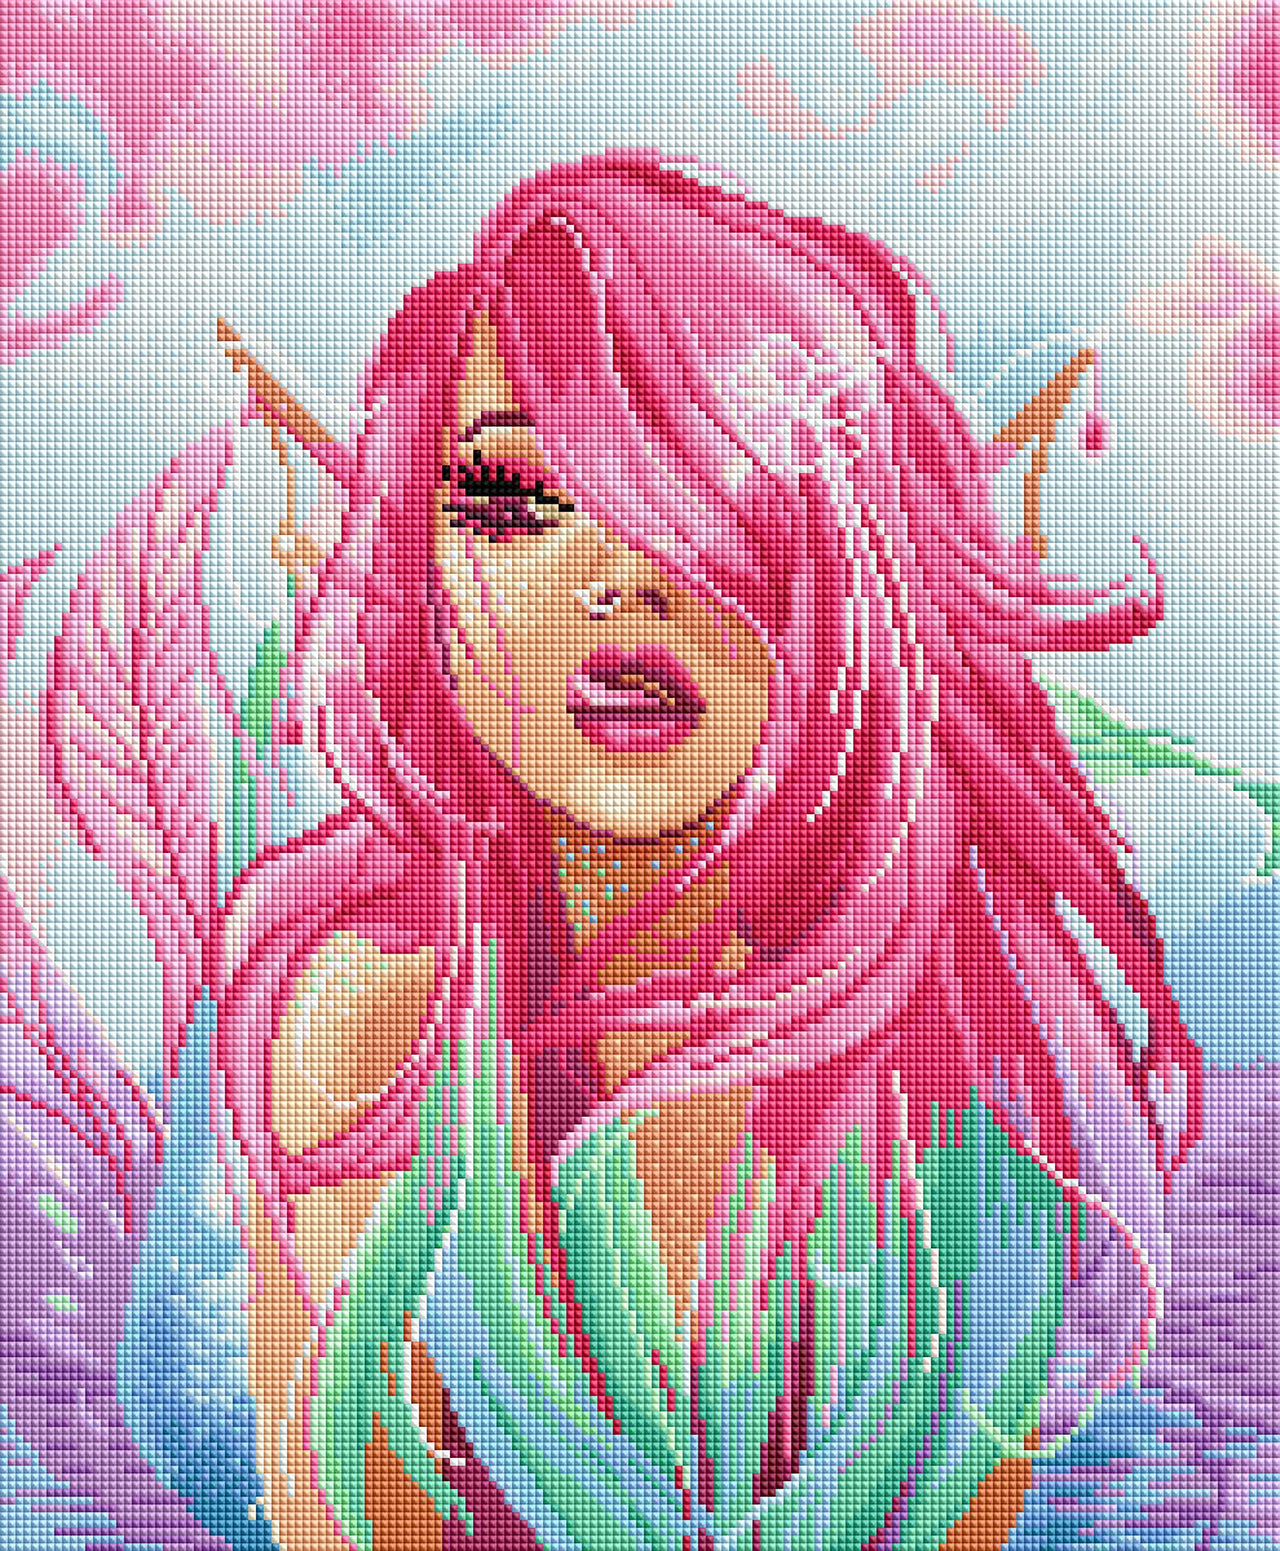 Diamond Painting Pink Mermaid 16.5" x 20.1″ (42cm x 51cm) / Square With 35 Colors Including 3 ABs / 33,000